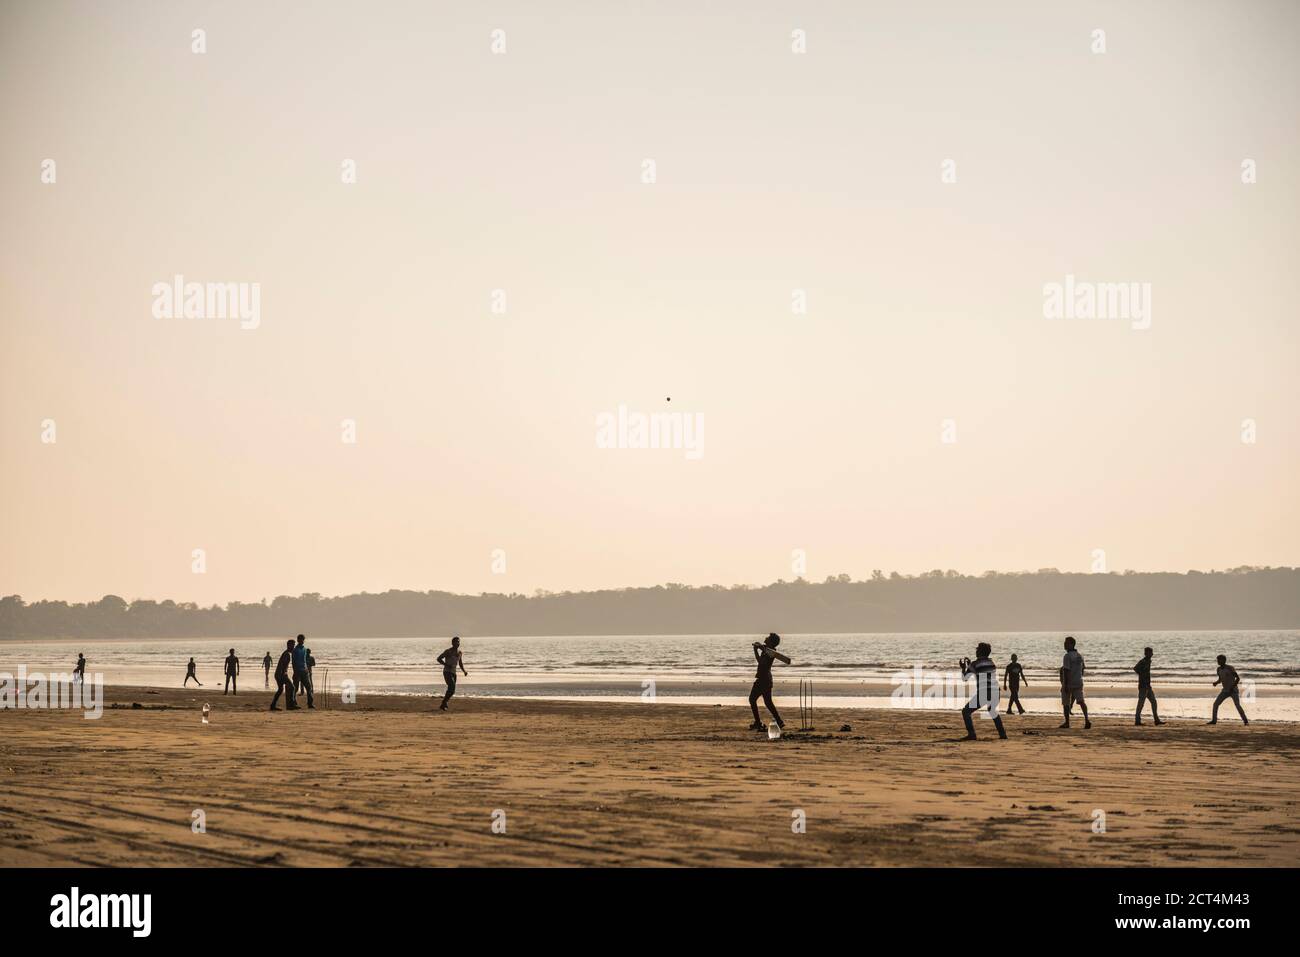 Street cricket in India, with a group playing as a batsman hits the ball on the beach at sunset under orange sky Stock Photo